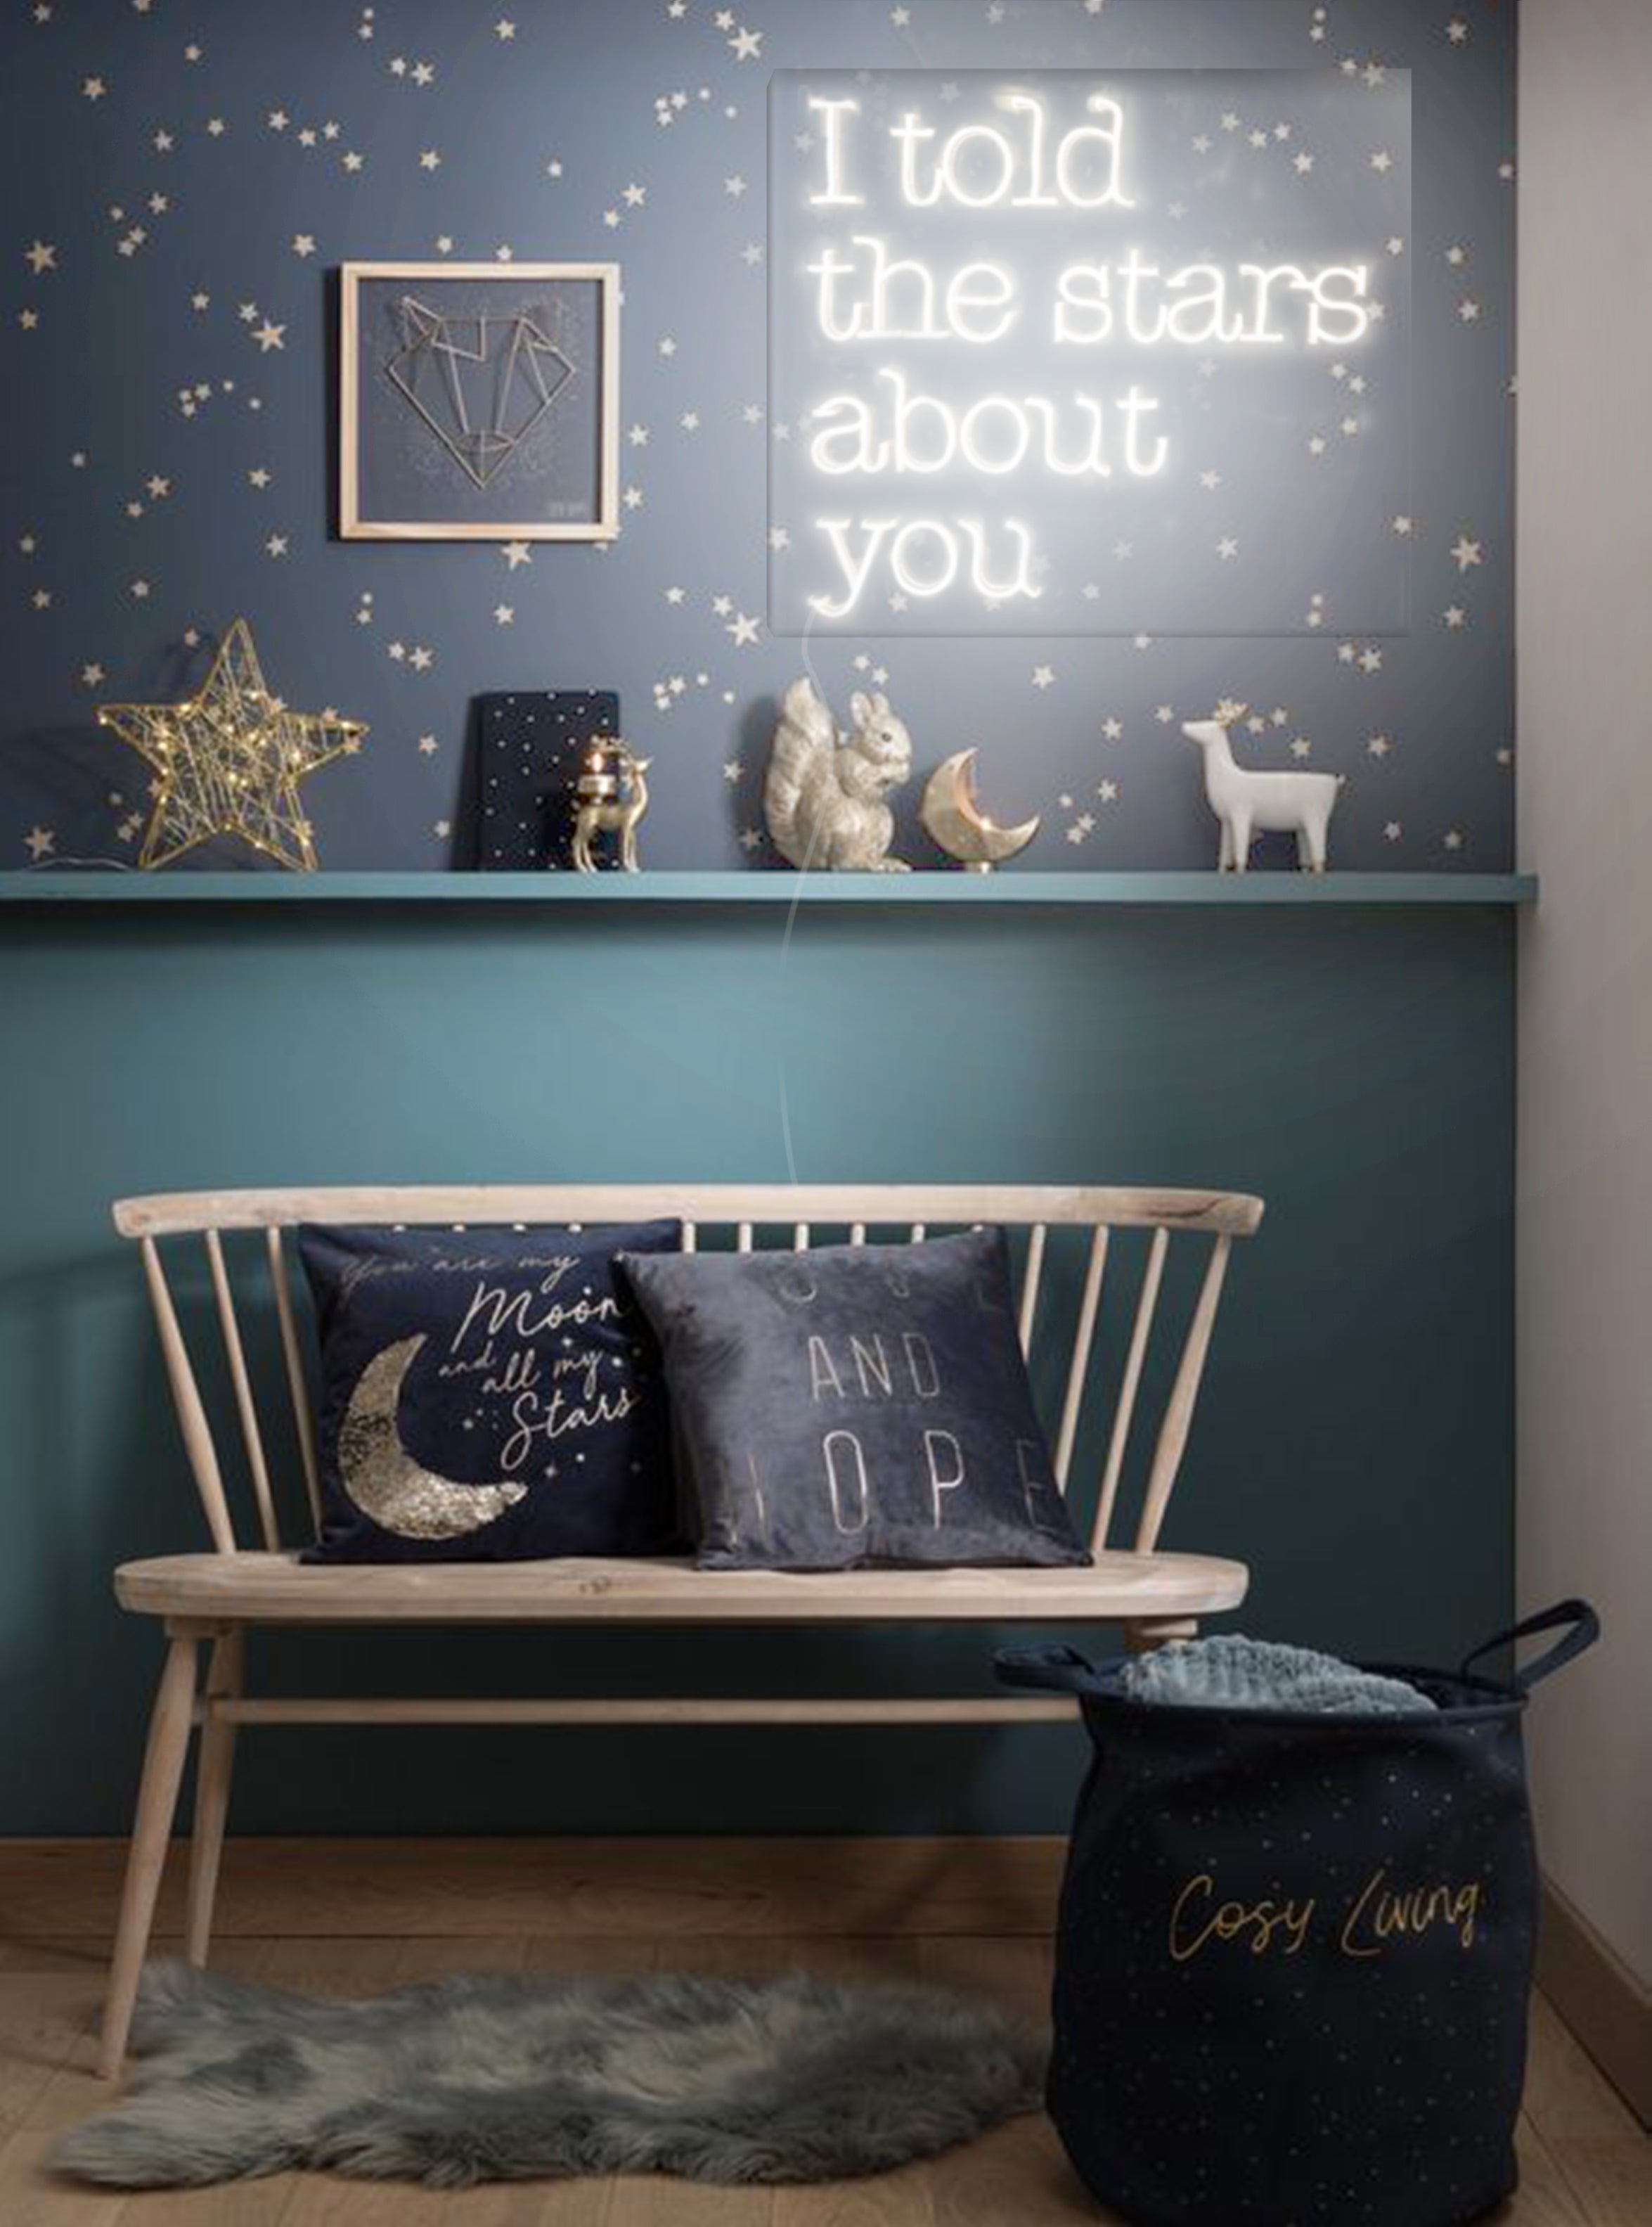 I Told the Stars About You - Warm White Nursery NEON Sign